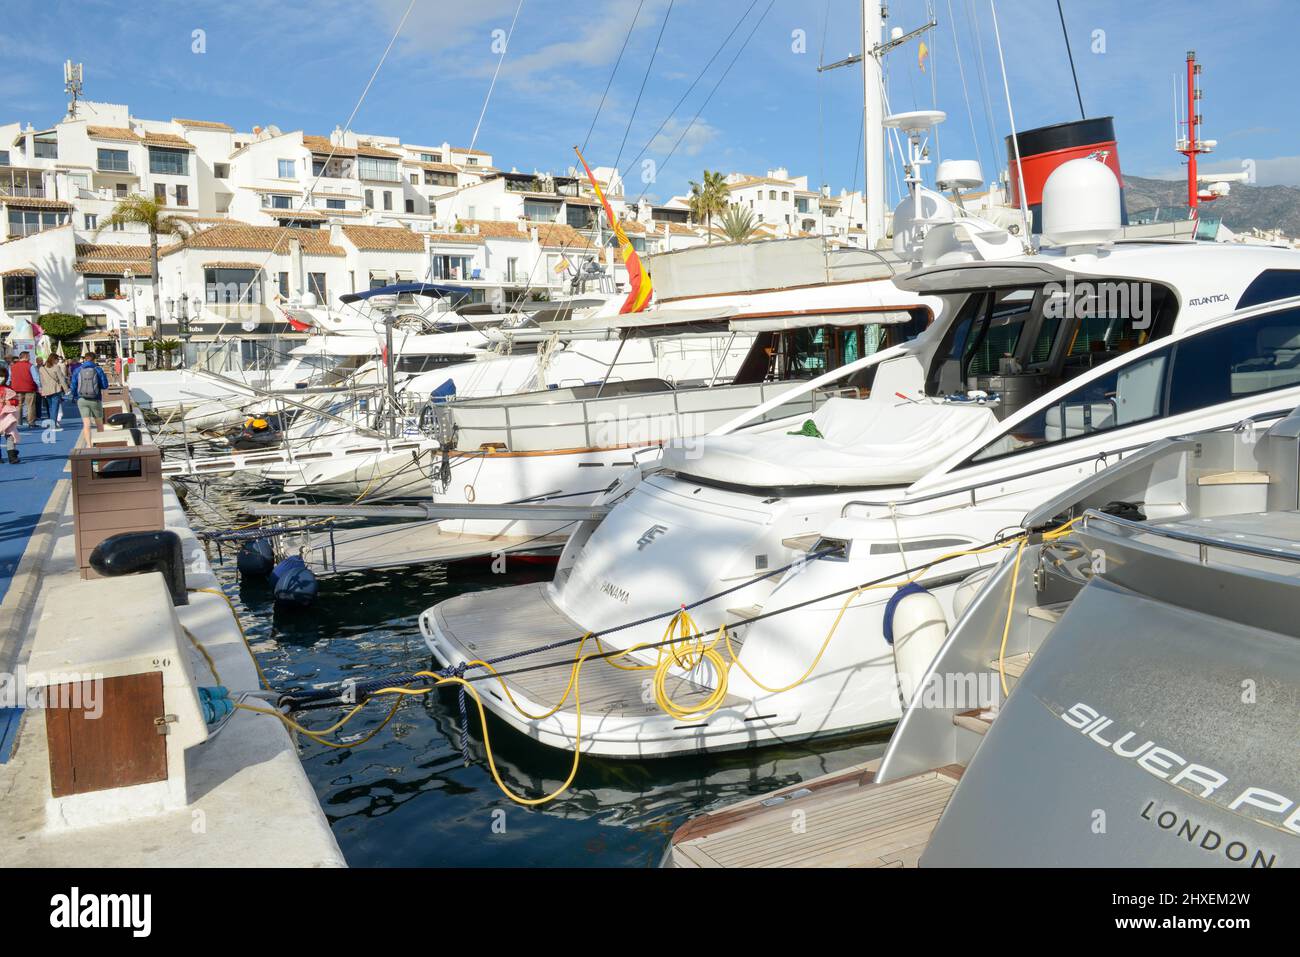 Luxury shops at the exclusive yacht harbour of Puerto Banús, Marbella,  Costa del Sol, Málaga province, Andalusia, Spain Stock Photo - Alamy